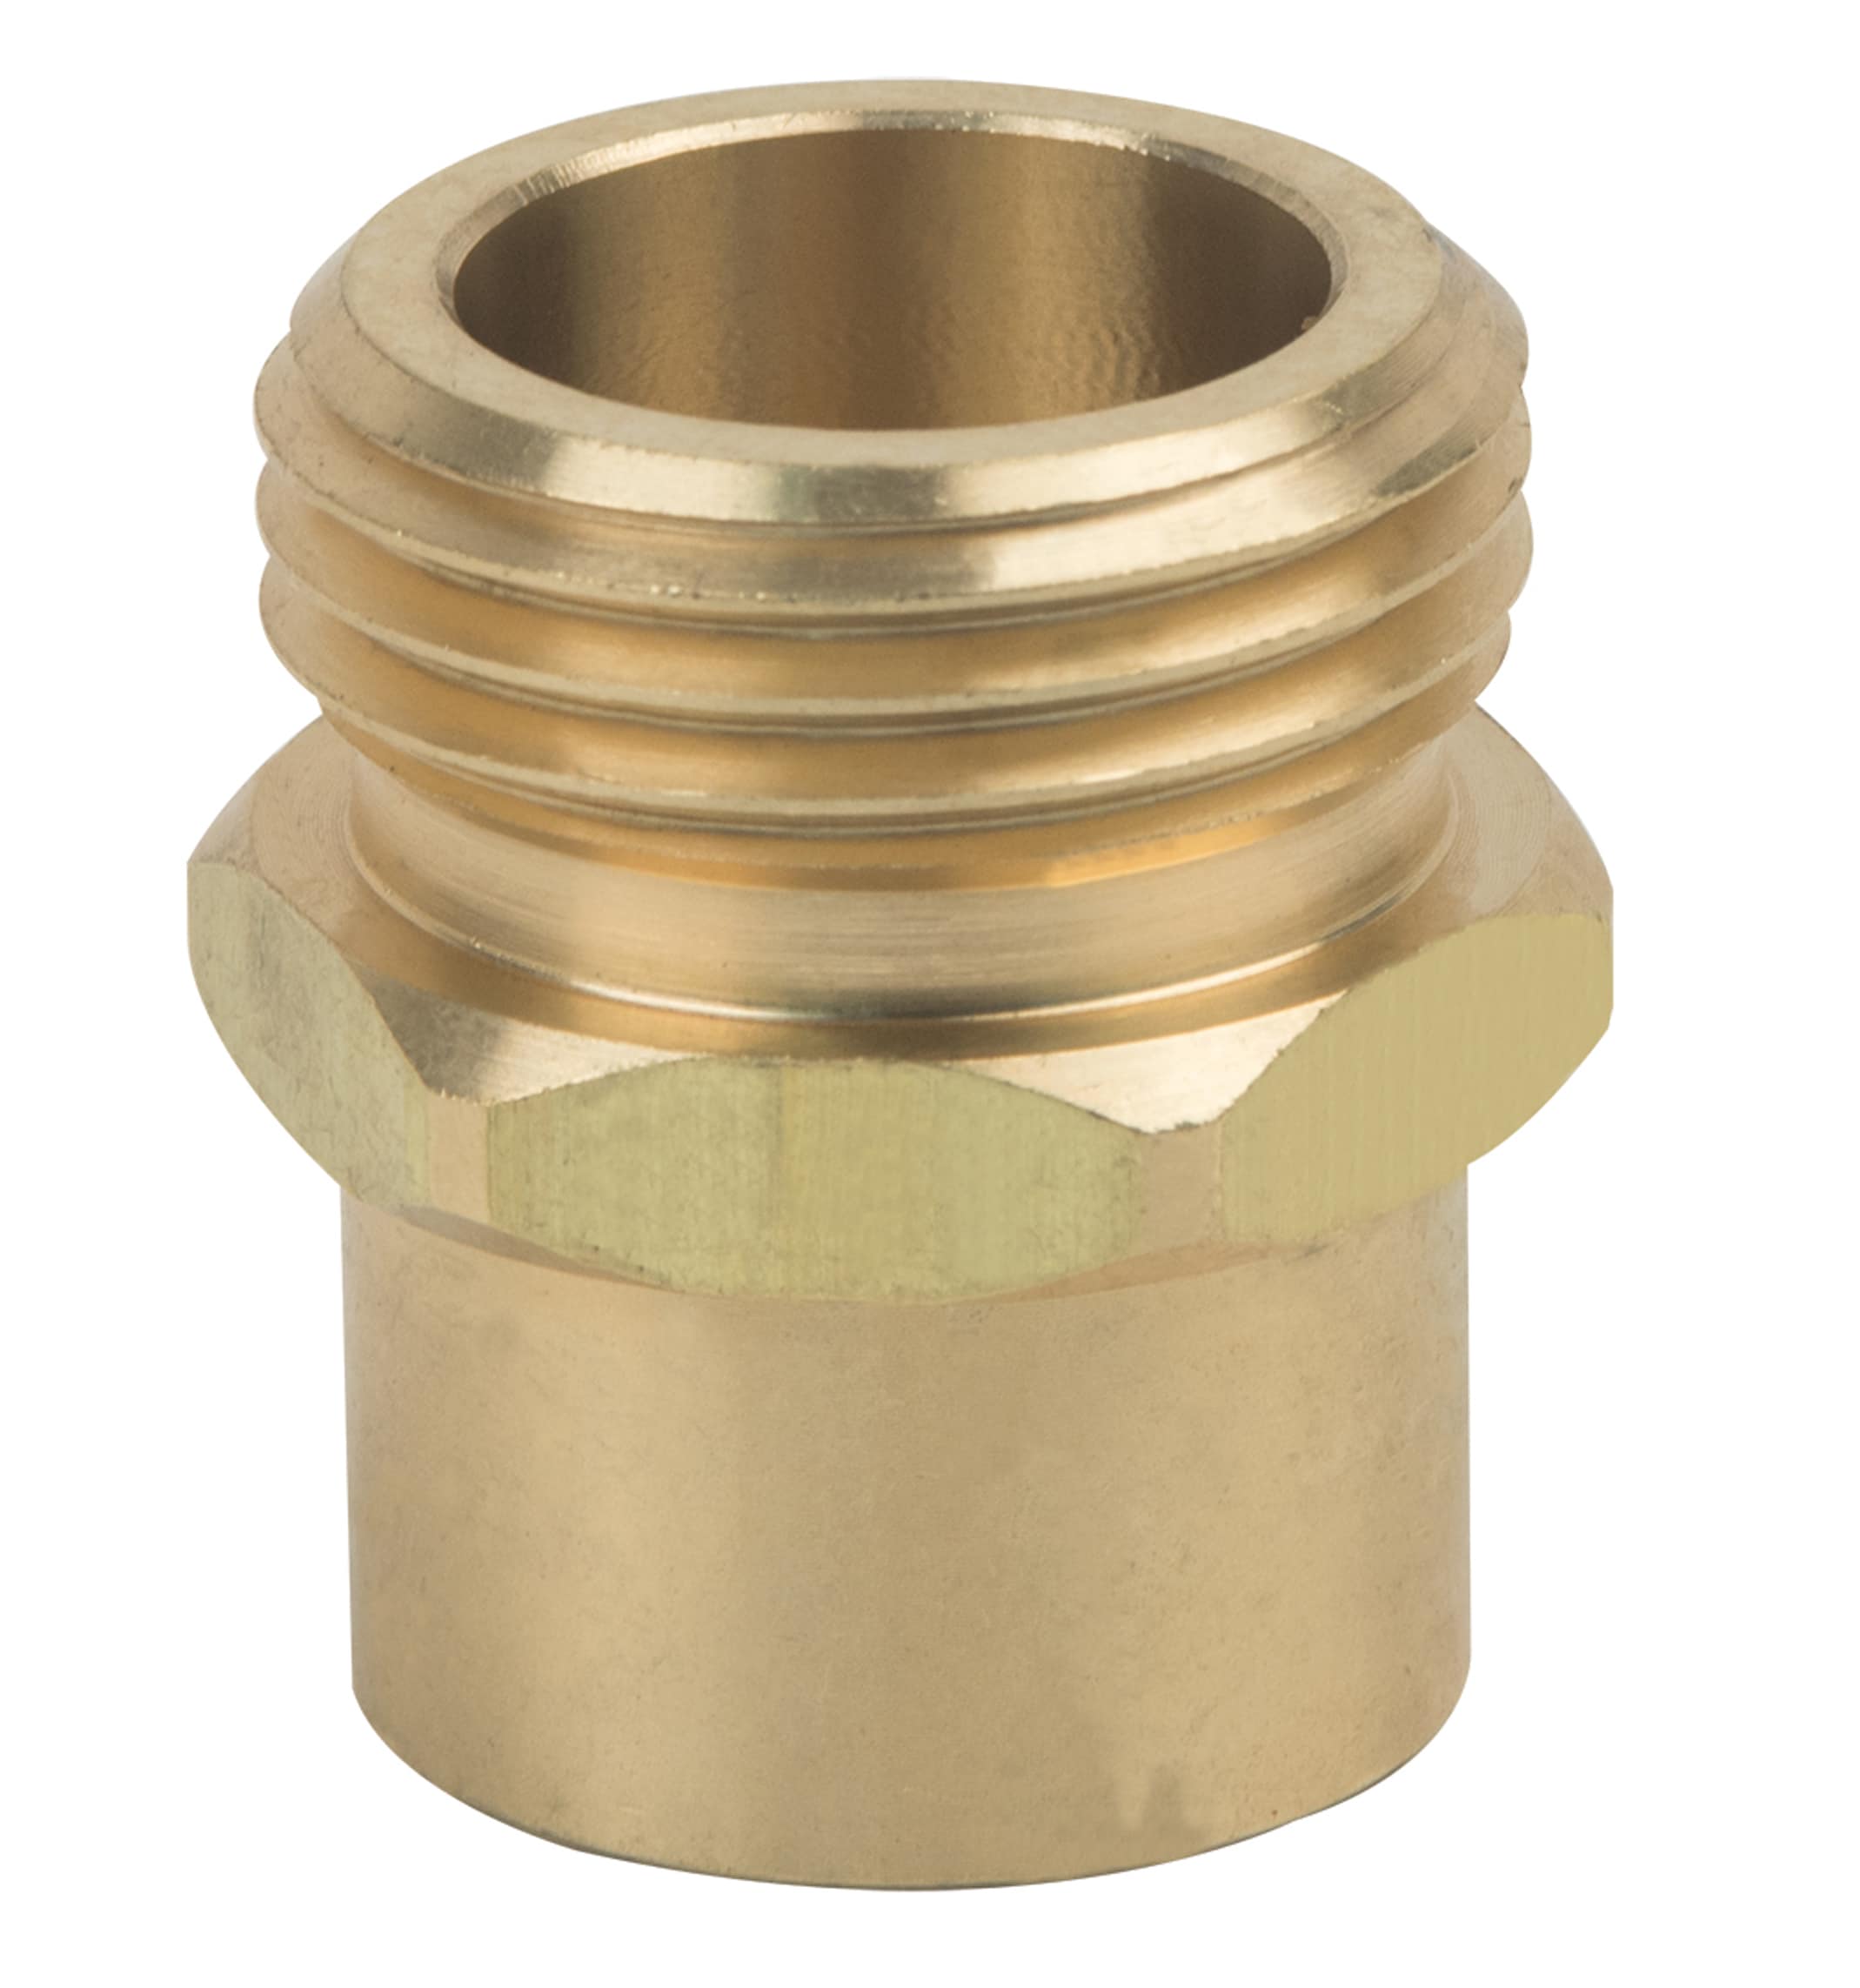 Brass Quick Hose Pipe Joint Connectors Male to Male 1/2" Gardens Pipe Extensions 